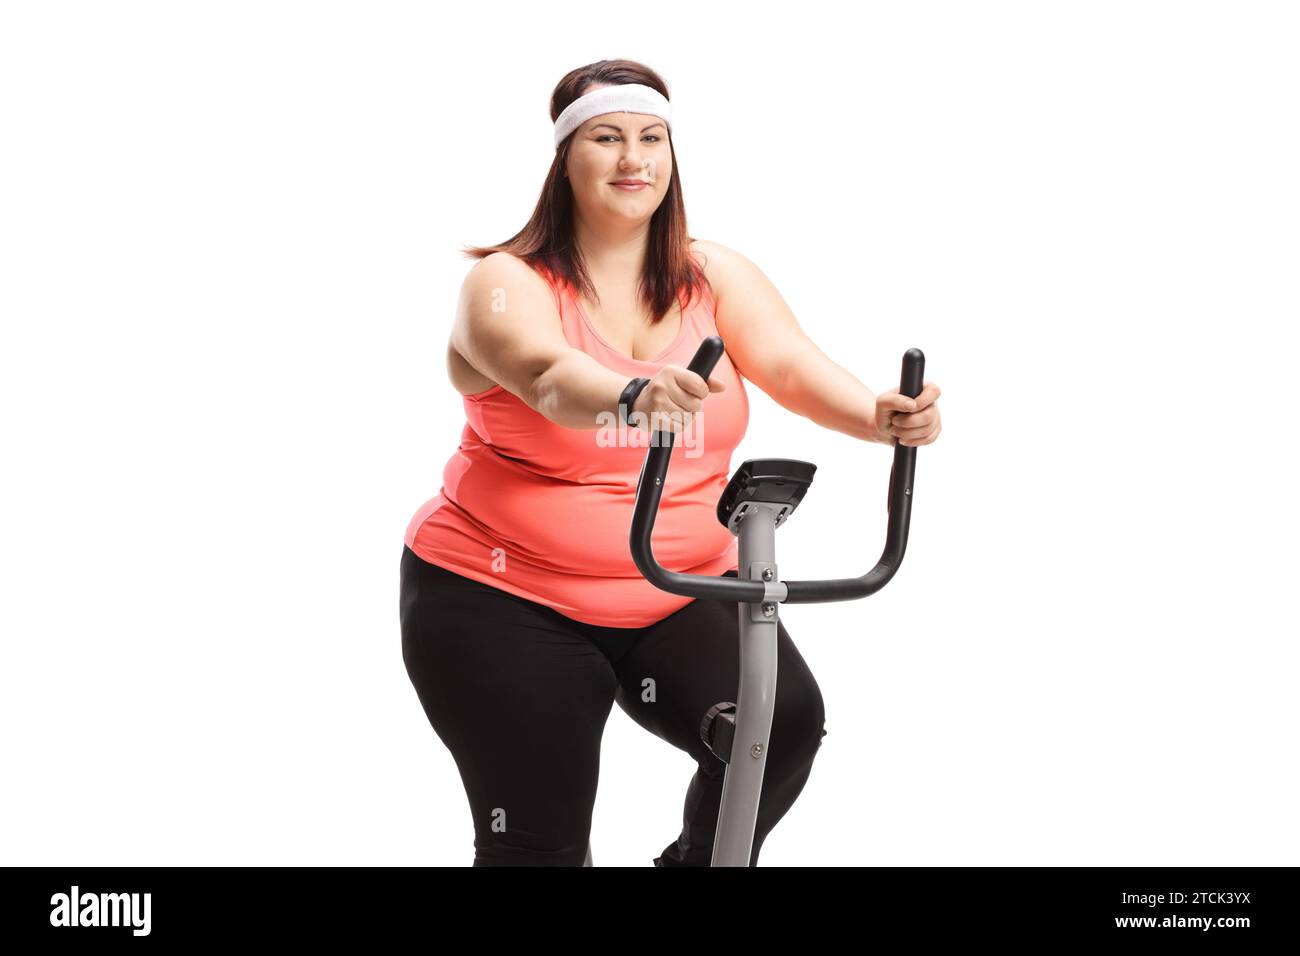 Young woman riding a stationary bike and looking at the camera isolated on white background Stock Photo